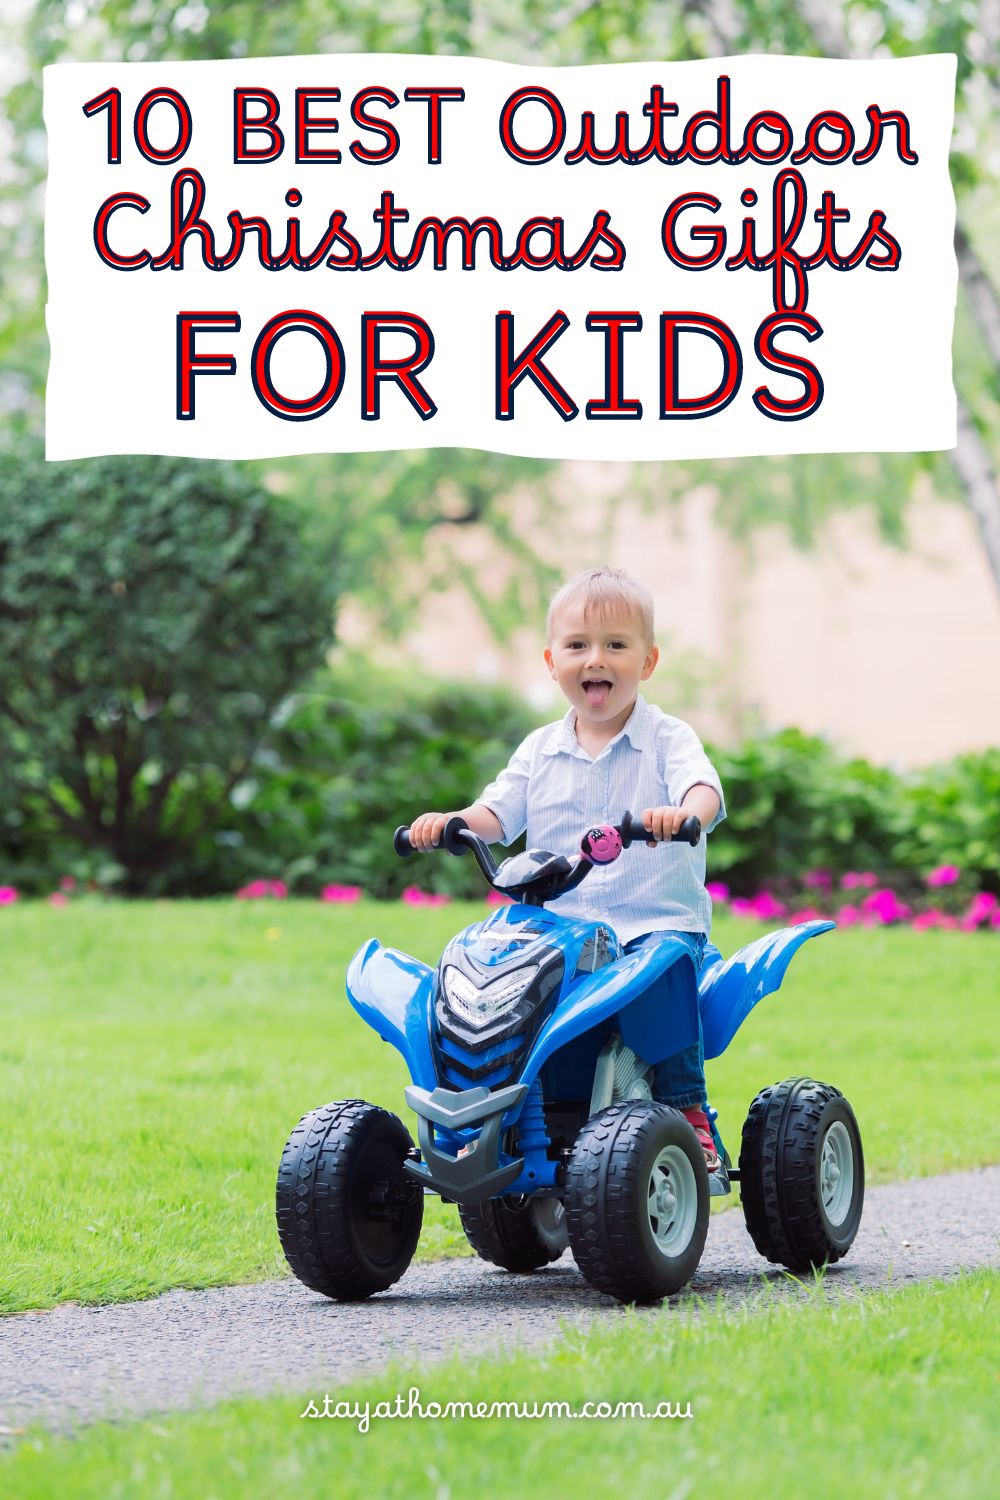 10 BEST Outdoor Christmas Gifts for Kids Pinnable